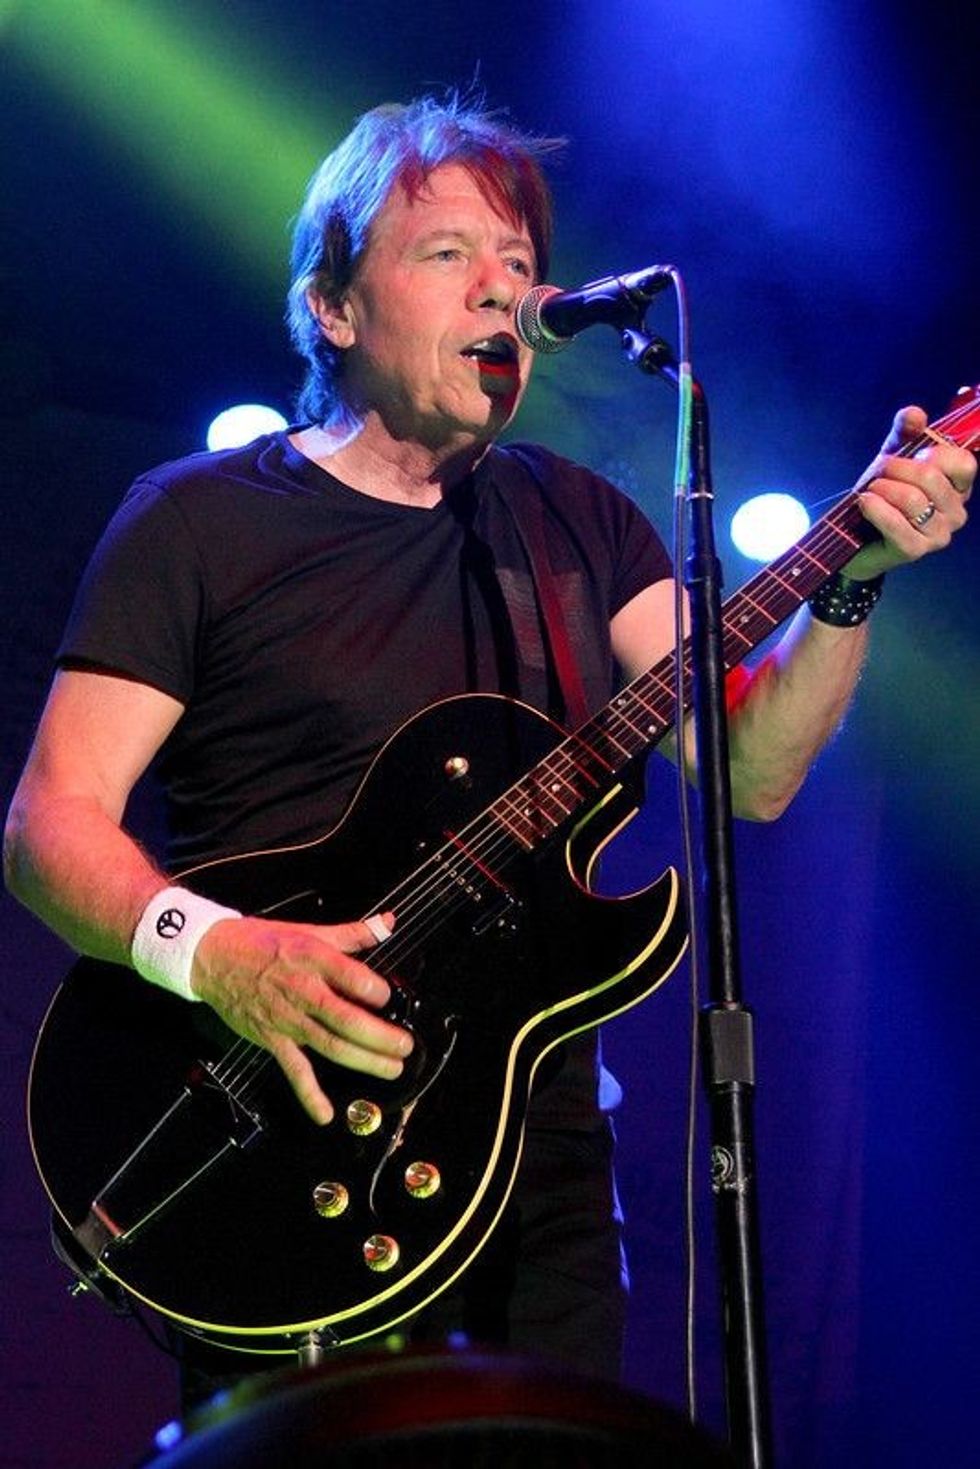 After acquiring an early interest in music, George Thorogood began his musical career in the '70s.